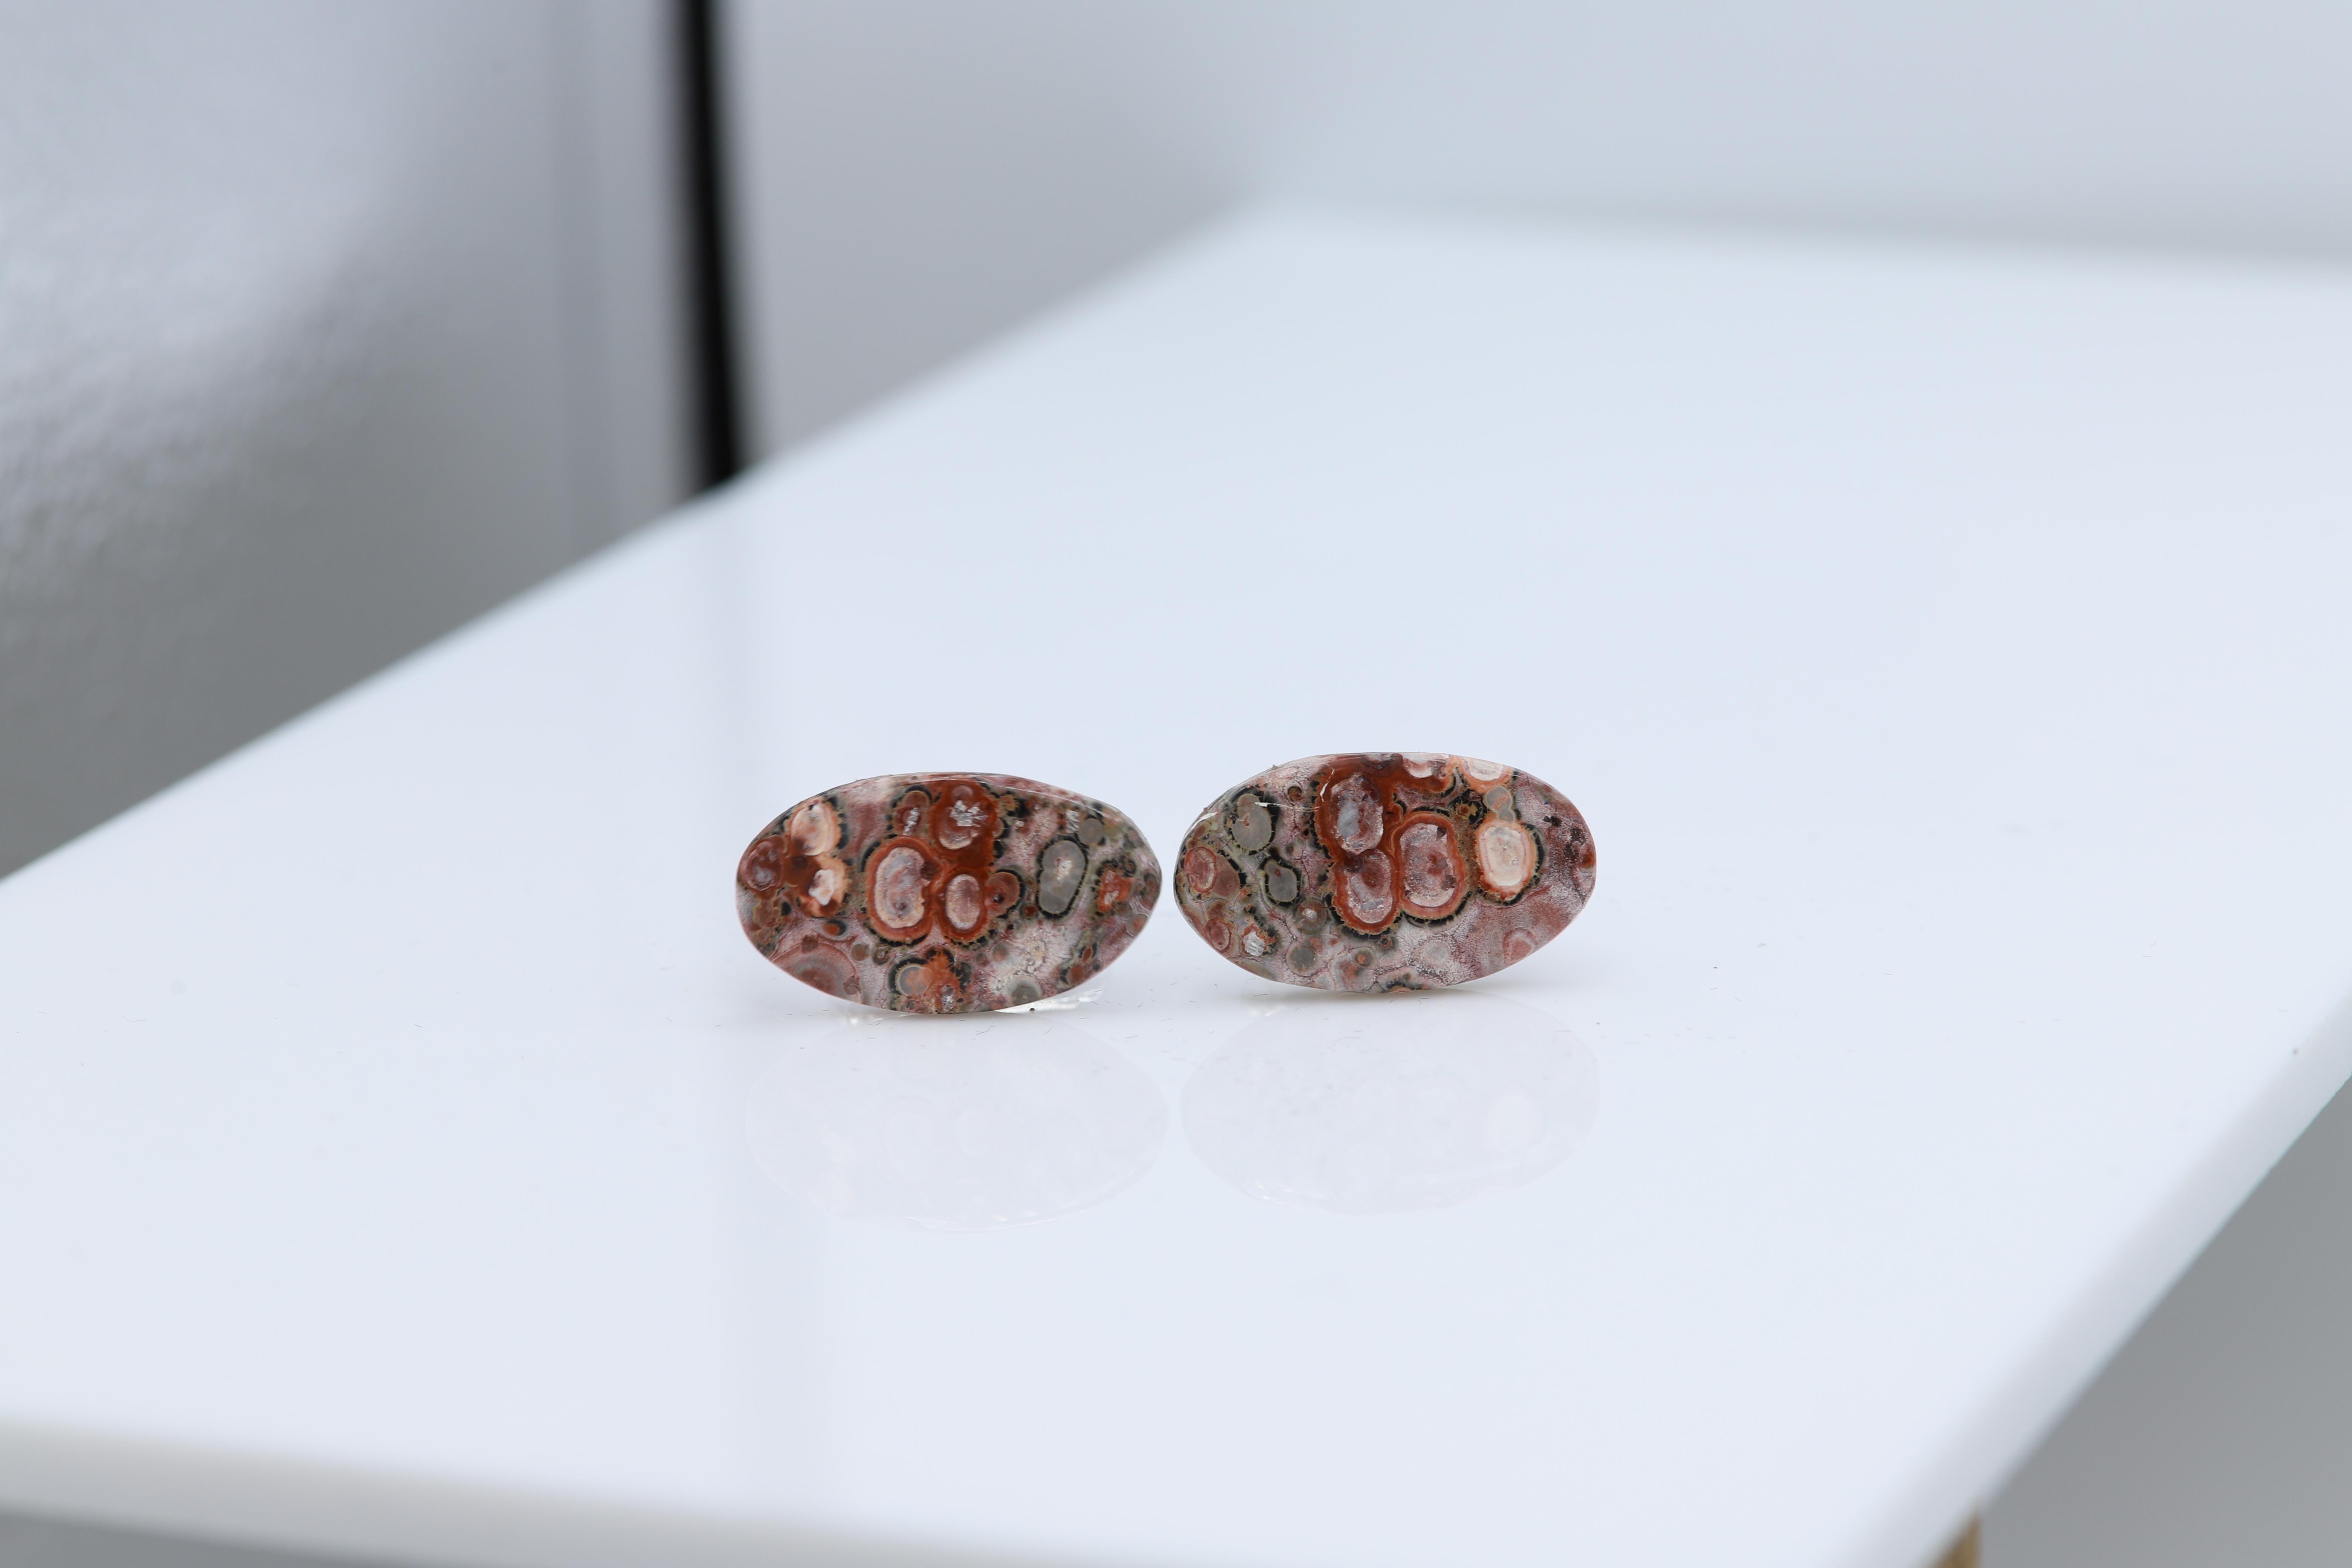 New unique men's cufflink - natural stone.
Stone name: Leopard skin Jasper
Approx. size 26 X 15 MM
Beautiful natural texture.
Imperfection may exist due to natural formations.
Back part metal is a general alloy metal - none precious
Gift Box